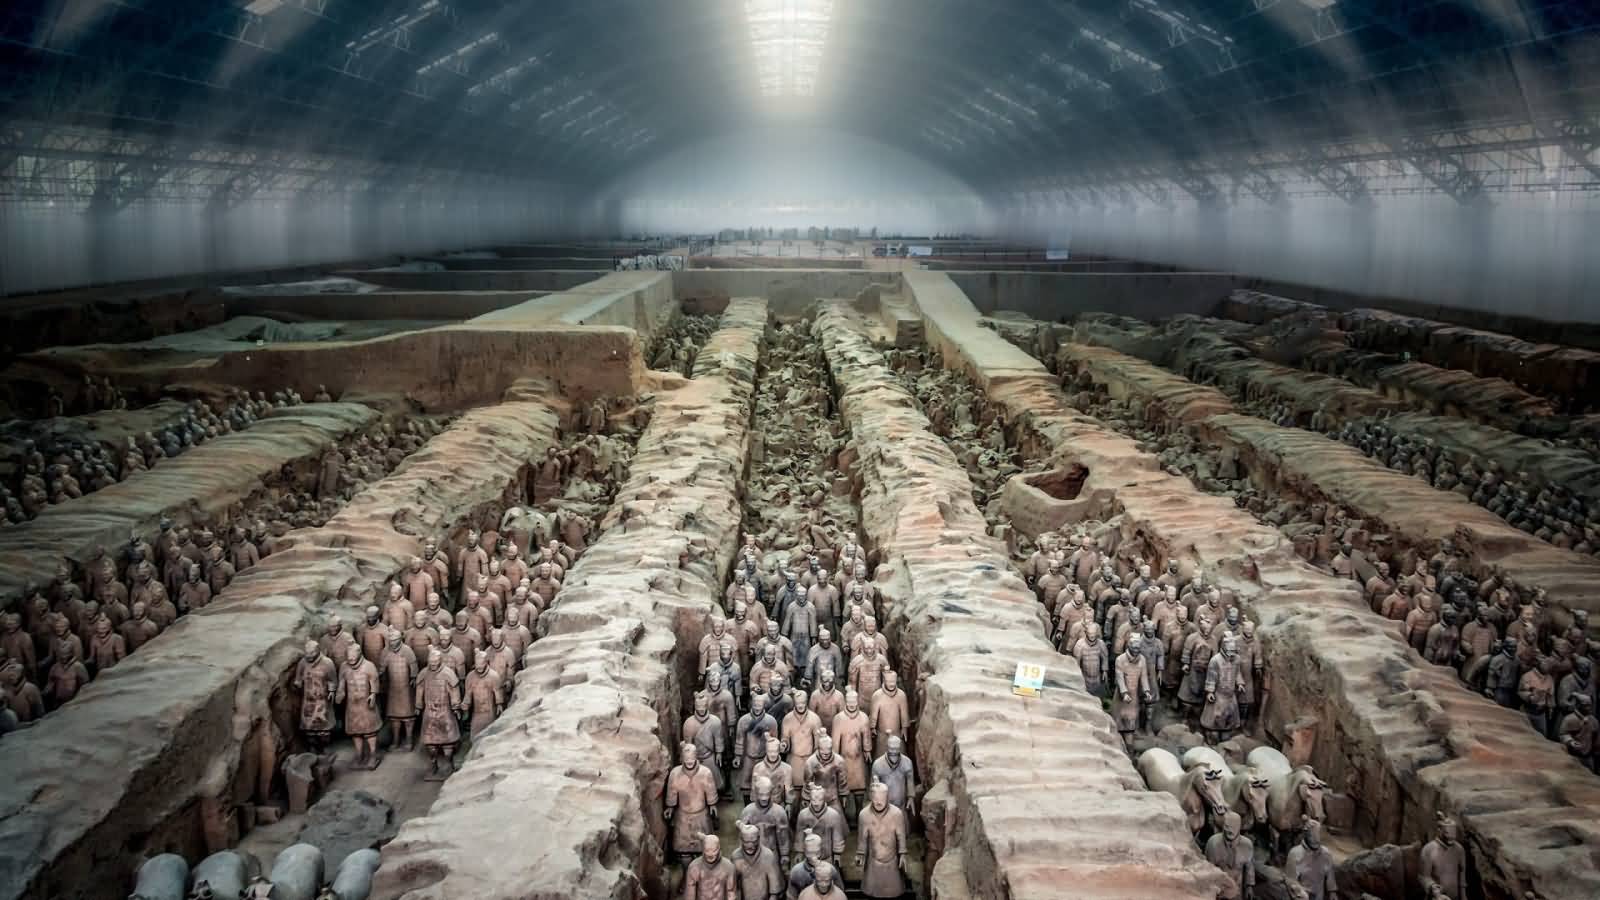 Terracotta Army Soldiers In Pits